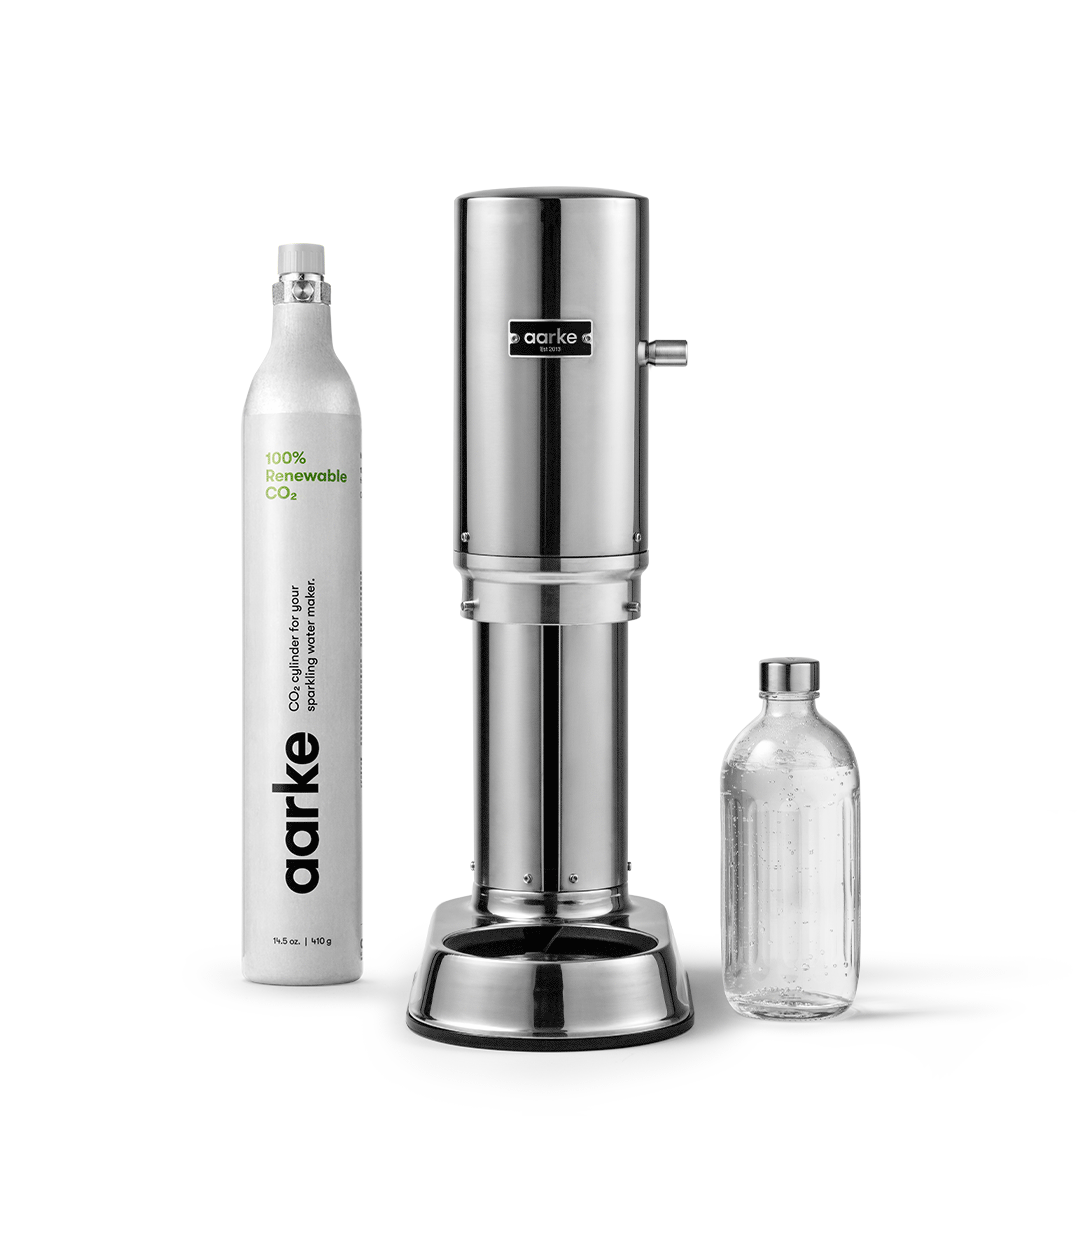 Aarke Carbonator Pro in Stainless Steel with 1 Aarke CO2 Cylinder and 1 Glass Bottle.